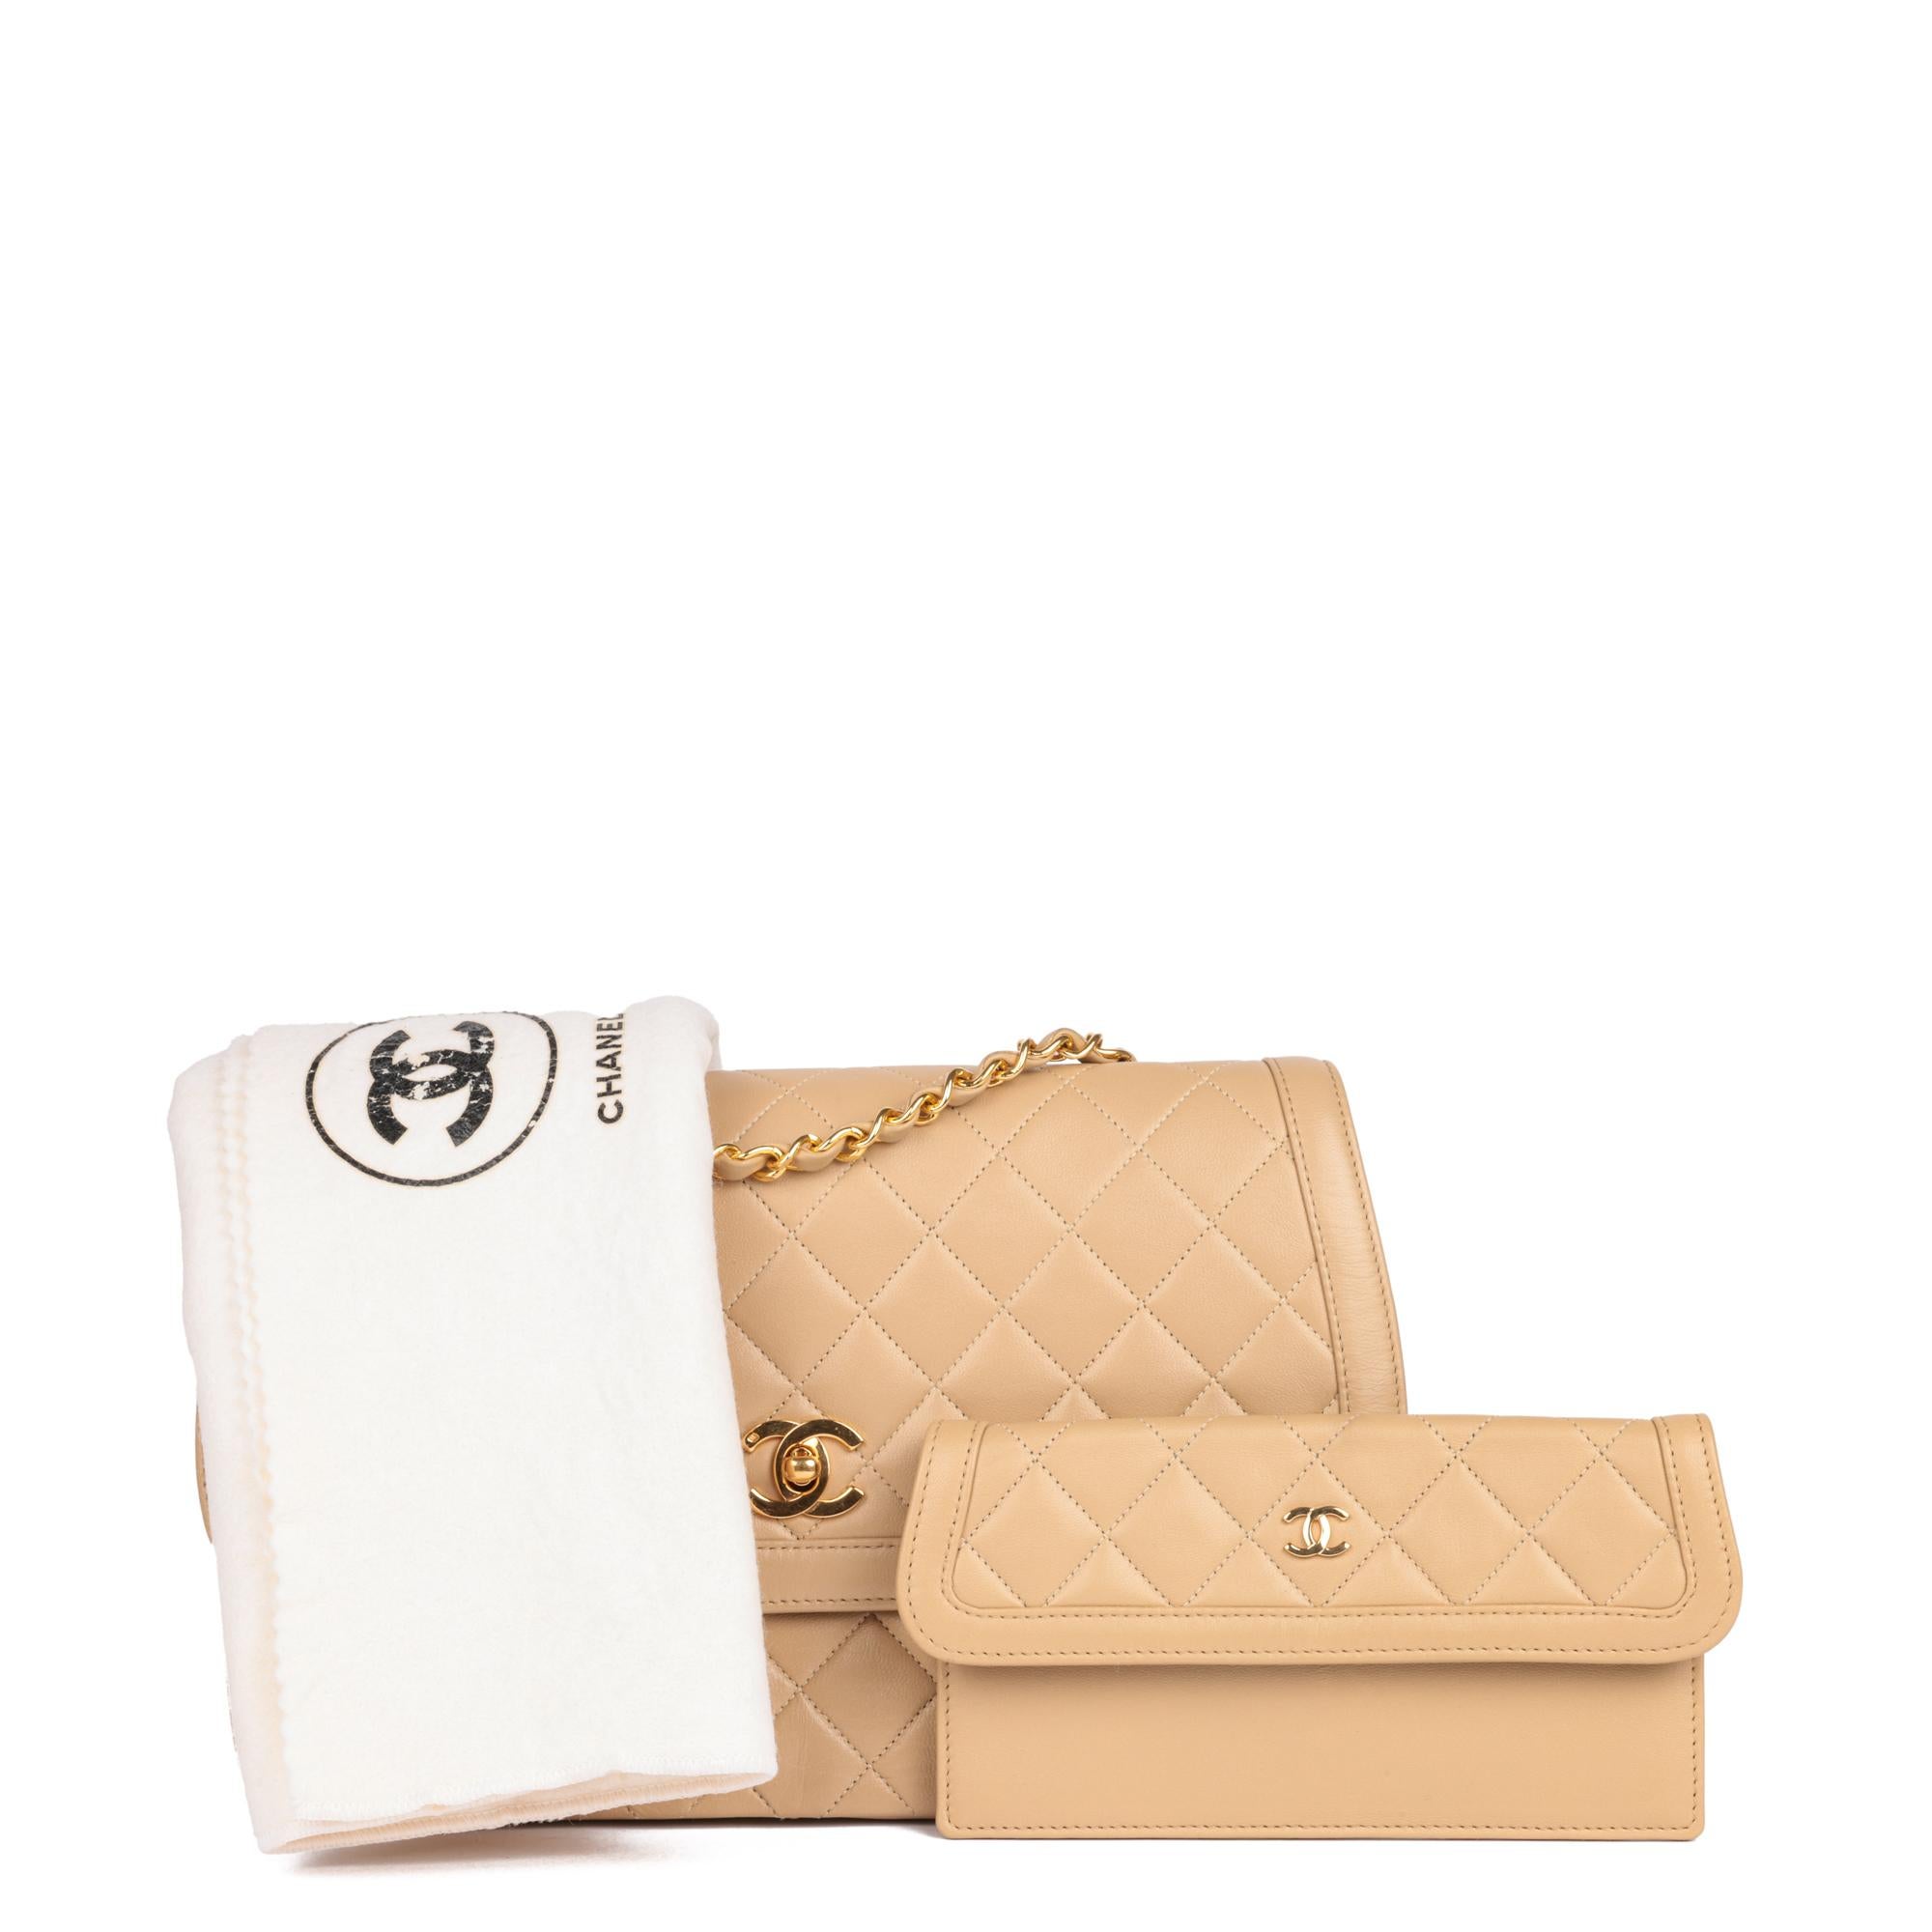 CHANEL Beige Quilted Lambskin Vintage Medium Classic Single Flap Bag with Wallet For Sale 7